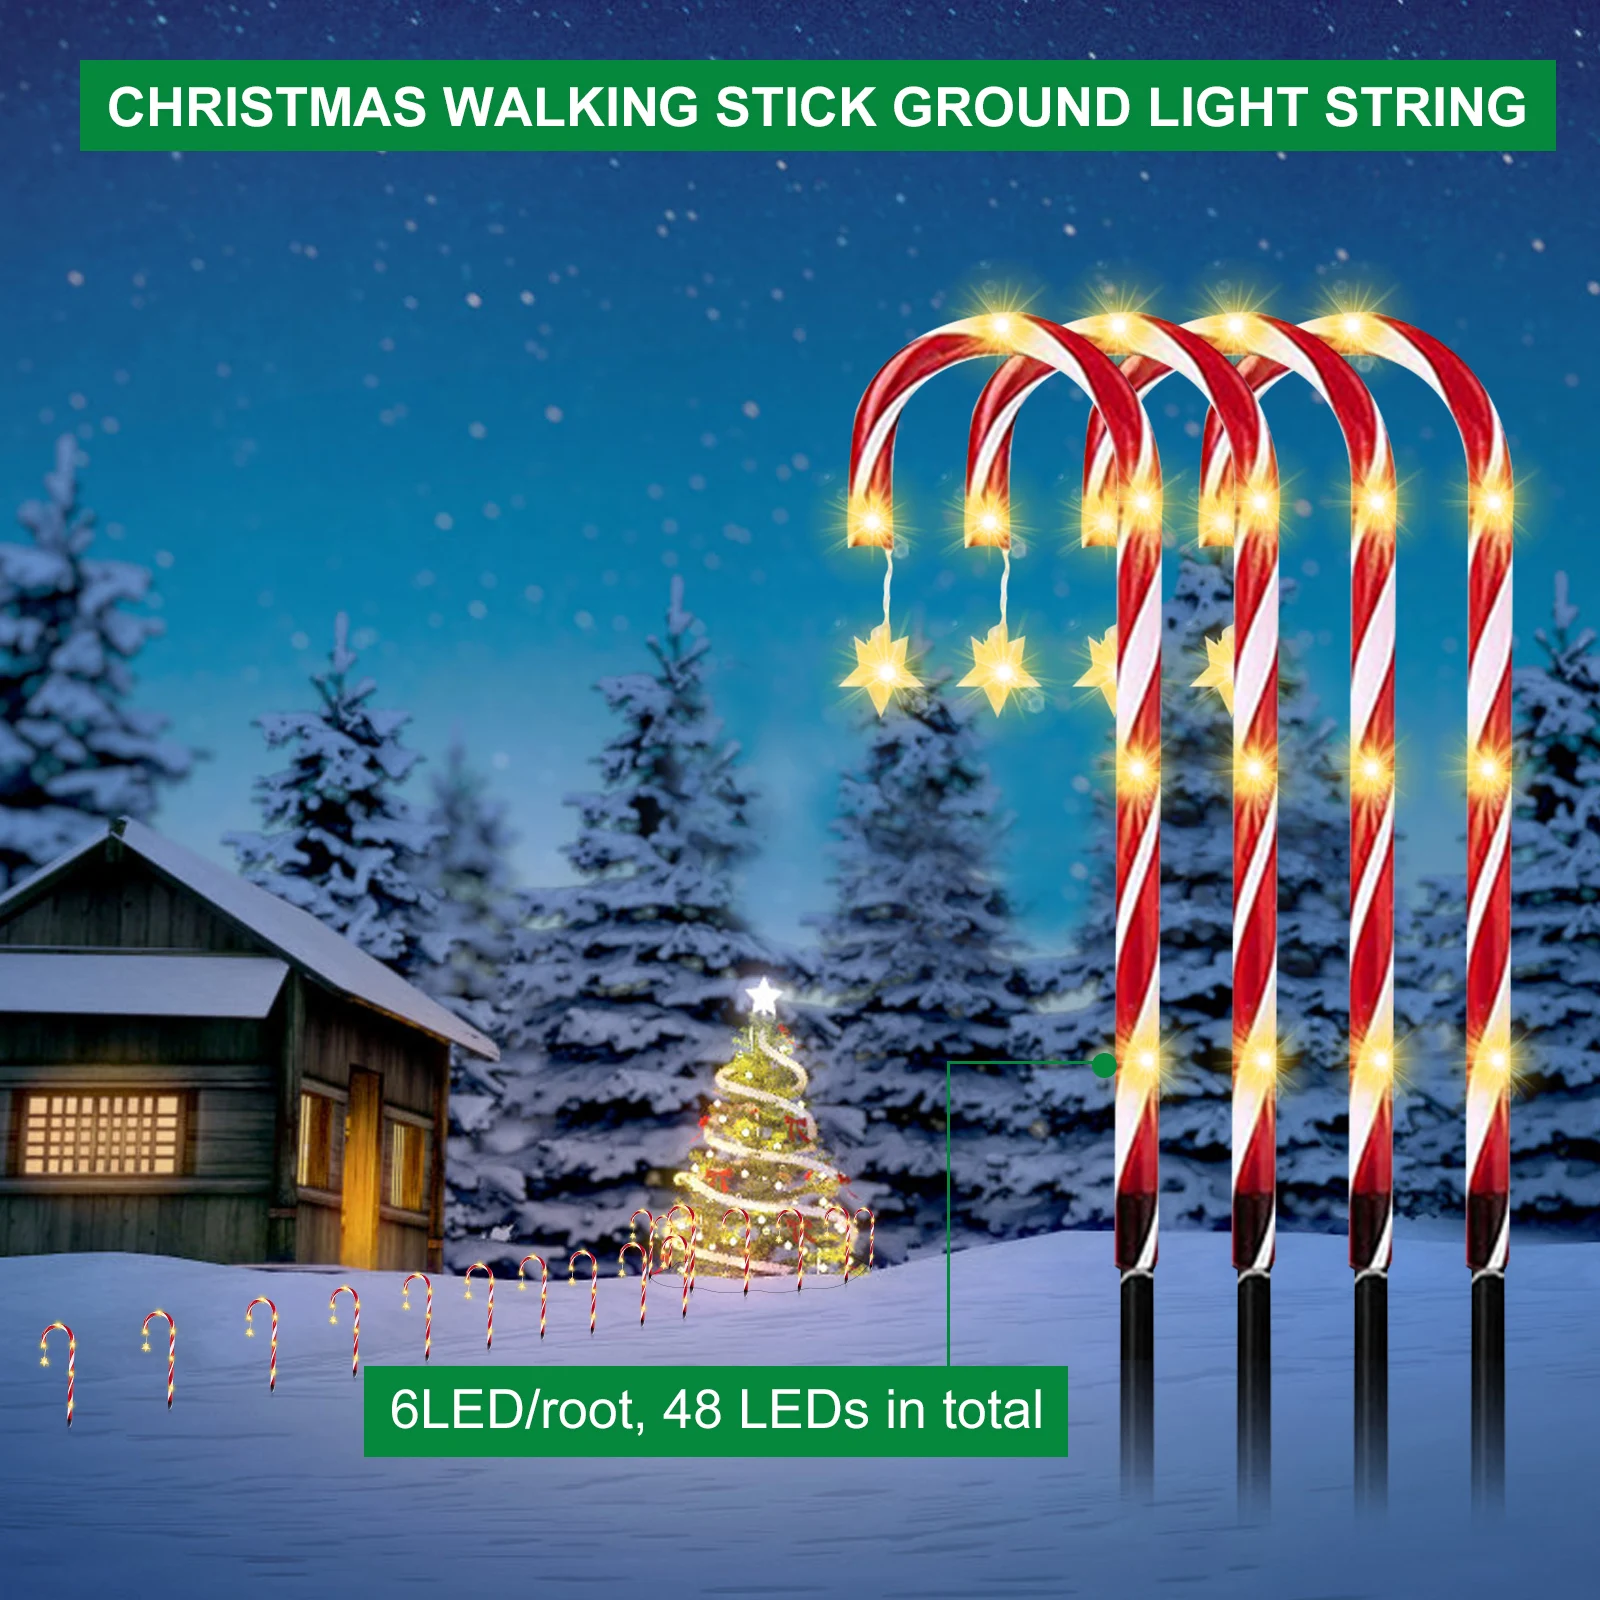 

Solar Christmas Ground Plug Crutch Lamps Waterproof 8 Modes Festive Lawn Lights Outdoor Walkway Candy Cane Lamp for Lighting